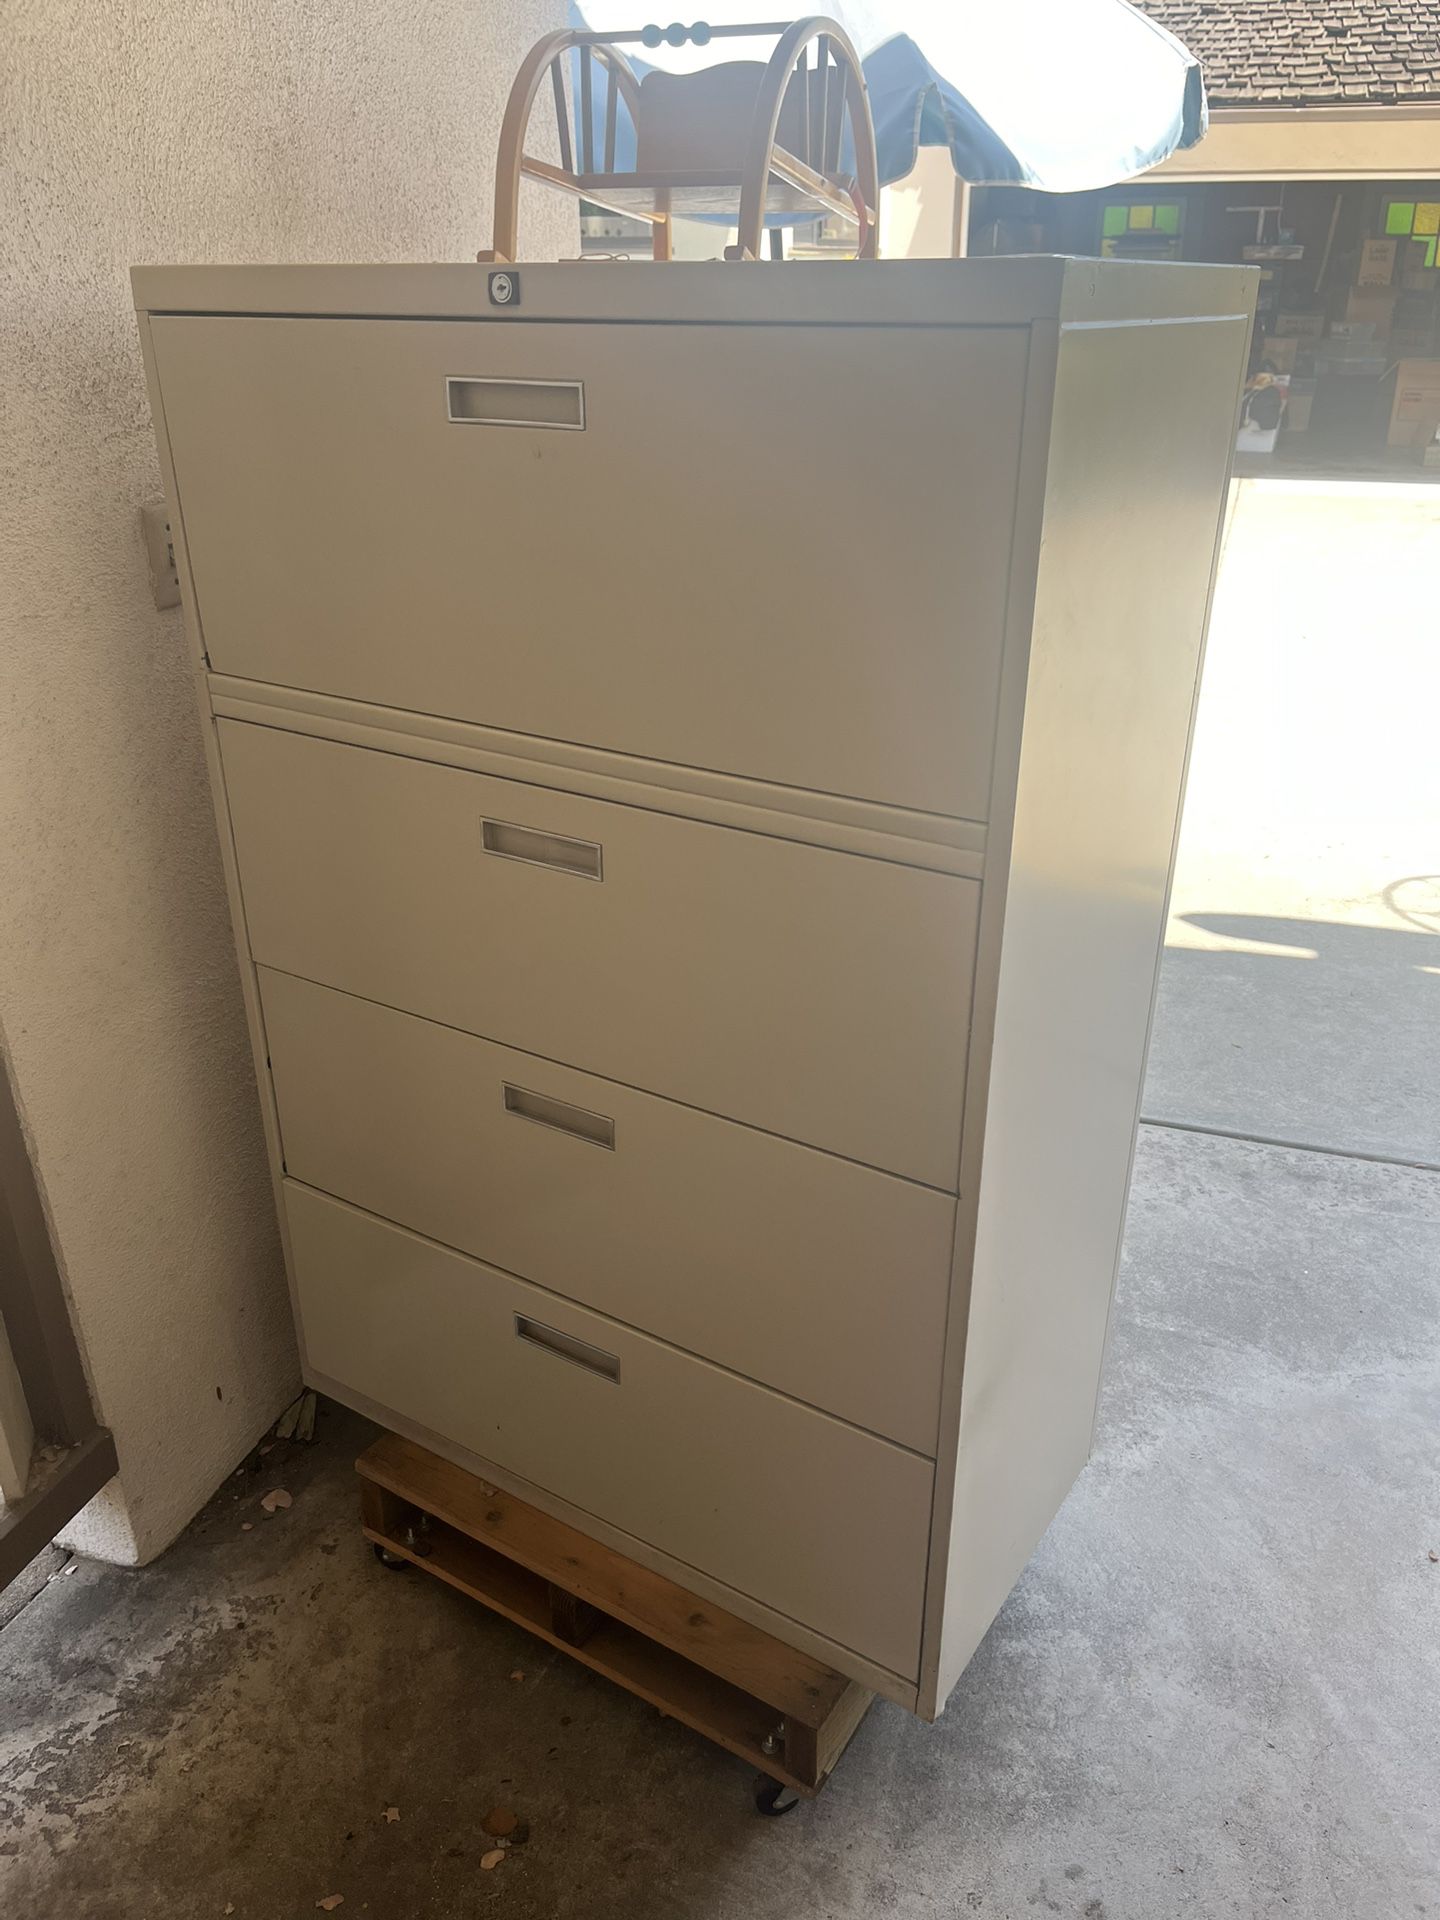 Large File Cabinets